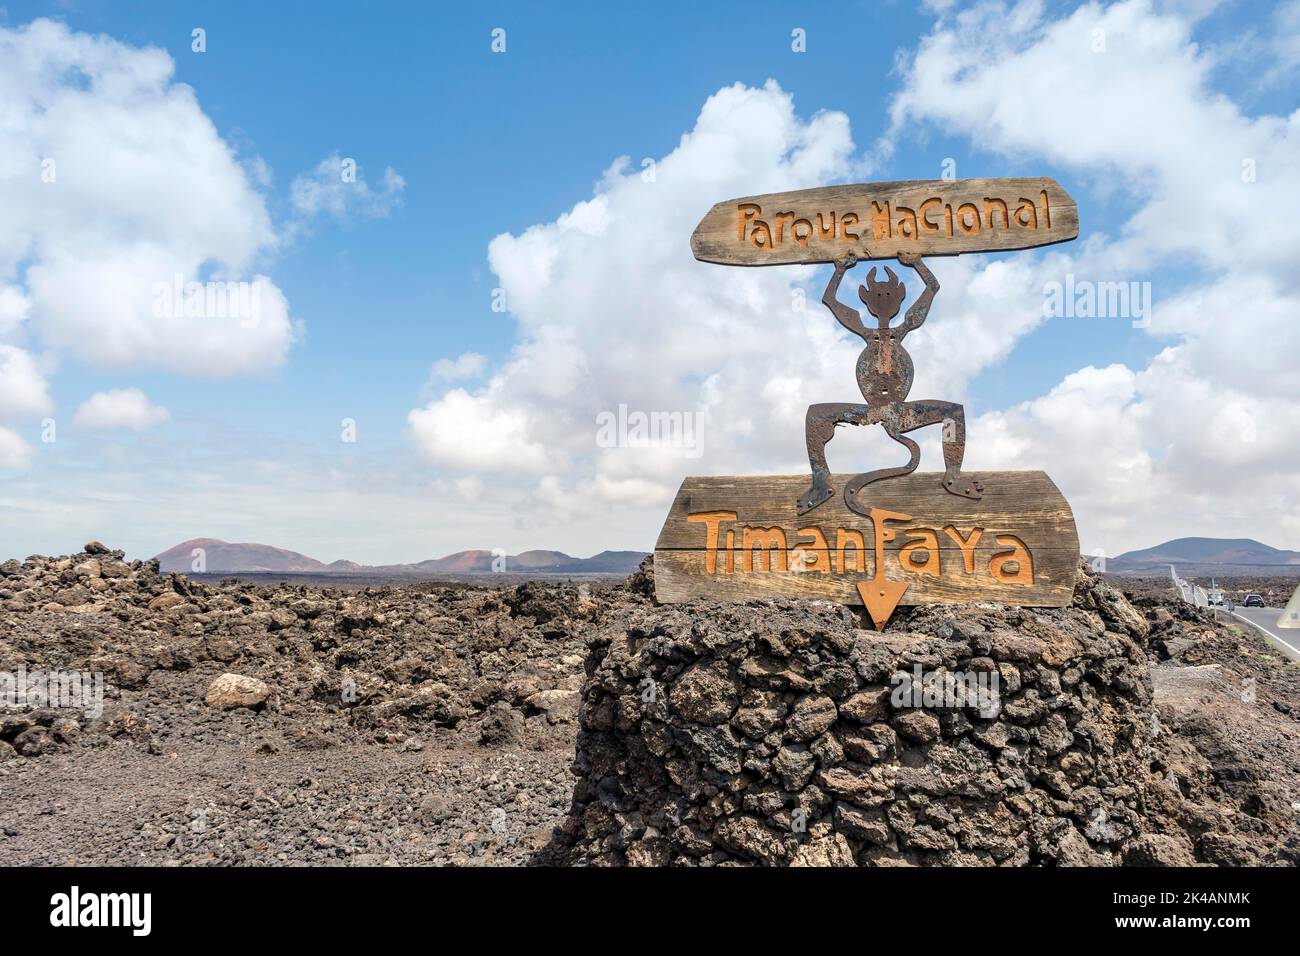 Timanfaya National Park sign on volcanic black rocks in Lanzarote, Canary Islands, Spain Stock Photo